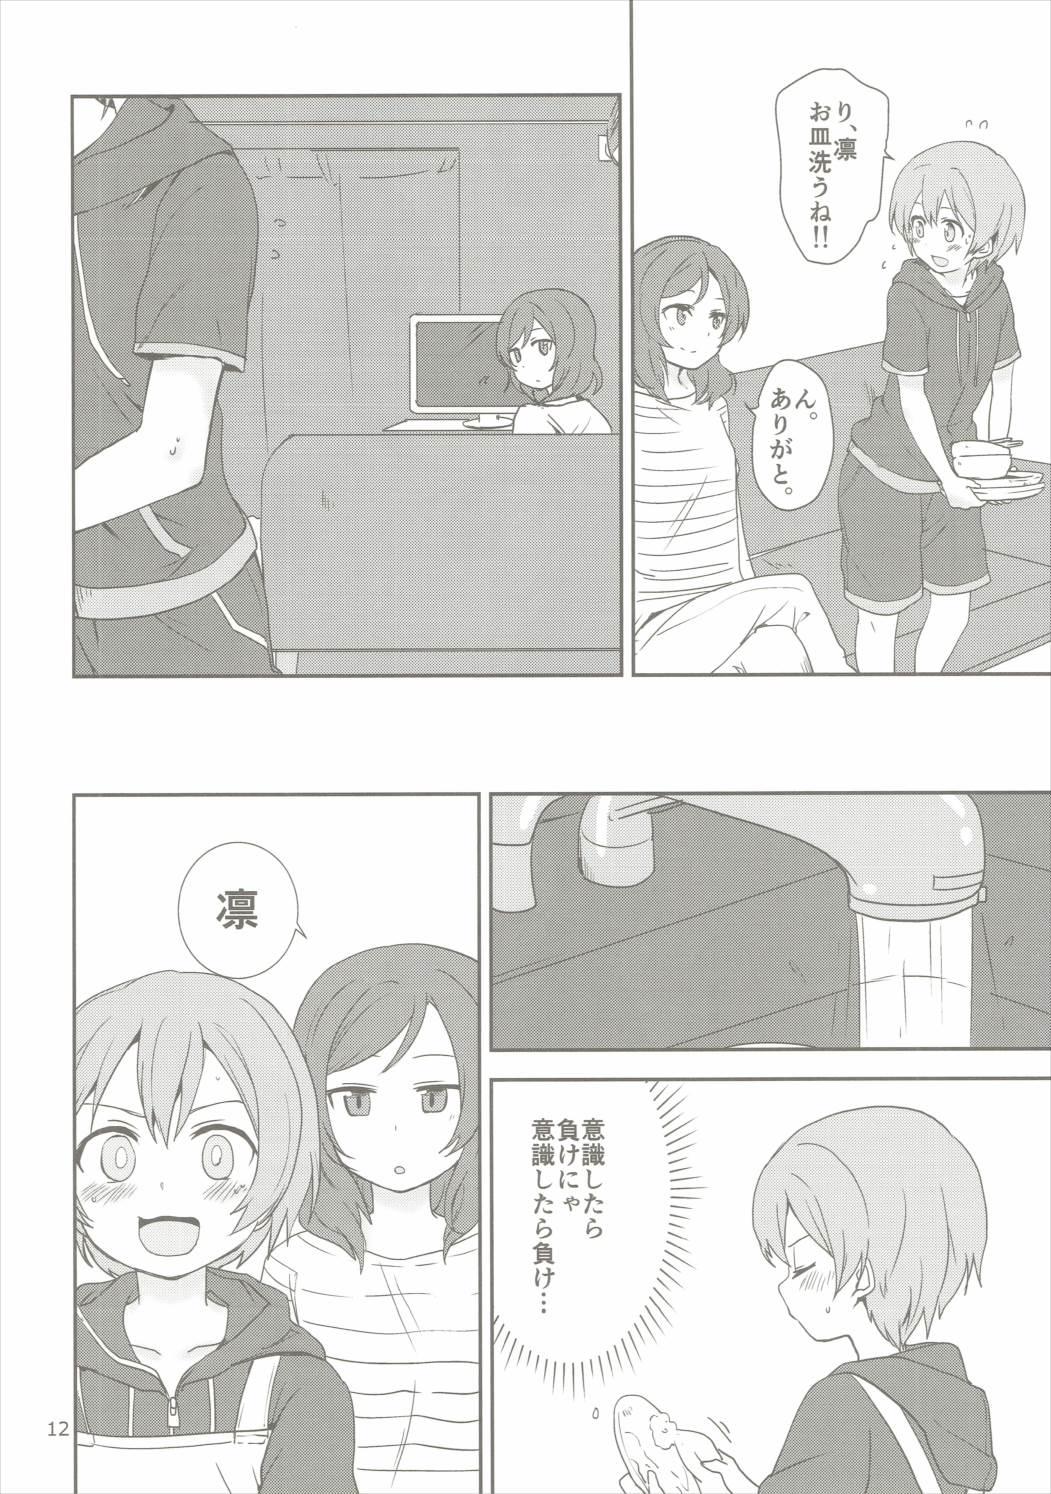 Worship Dokodemo Issho - Love live Stepmother - Page 11